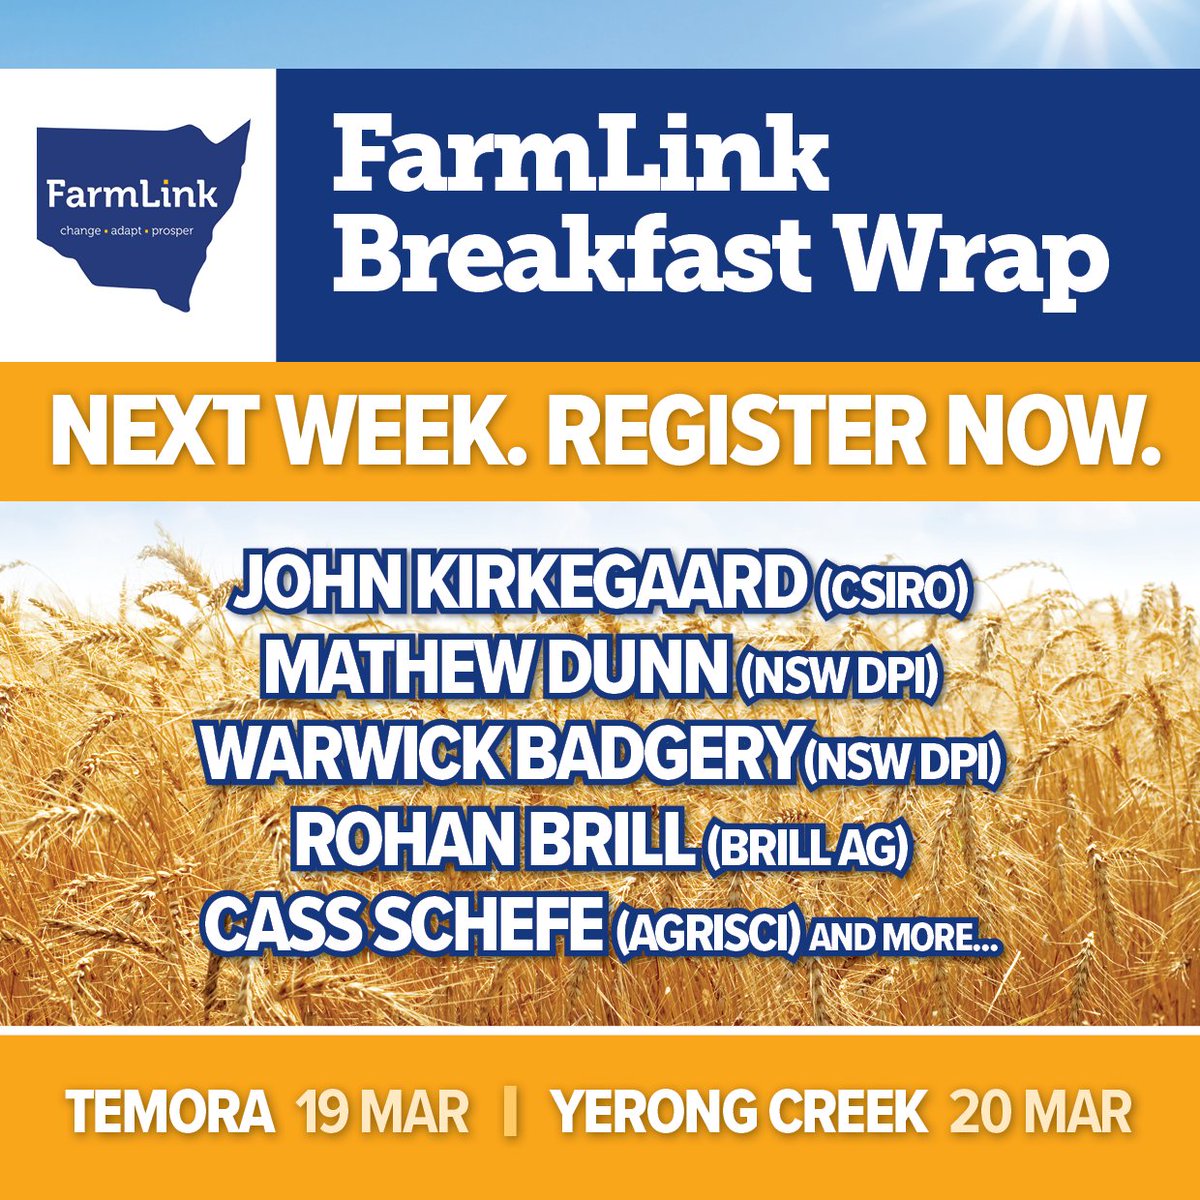 Register now for next week's pre-season breakfast updates.  
All welcome, free breakfast and a great line-up including:  John Kirkegaard @CSIRO, Mathew Dunn
@nswdpi, @WarwickBadgery NSW DPI, Rohan Brill @brill_ag and @CassandraSchefe AgriSci.     

Covering topics including: